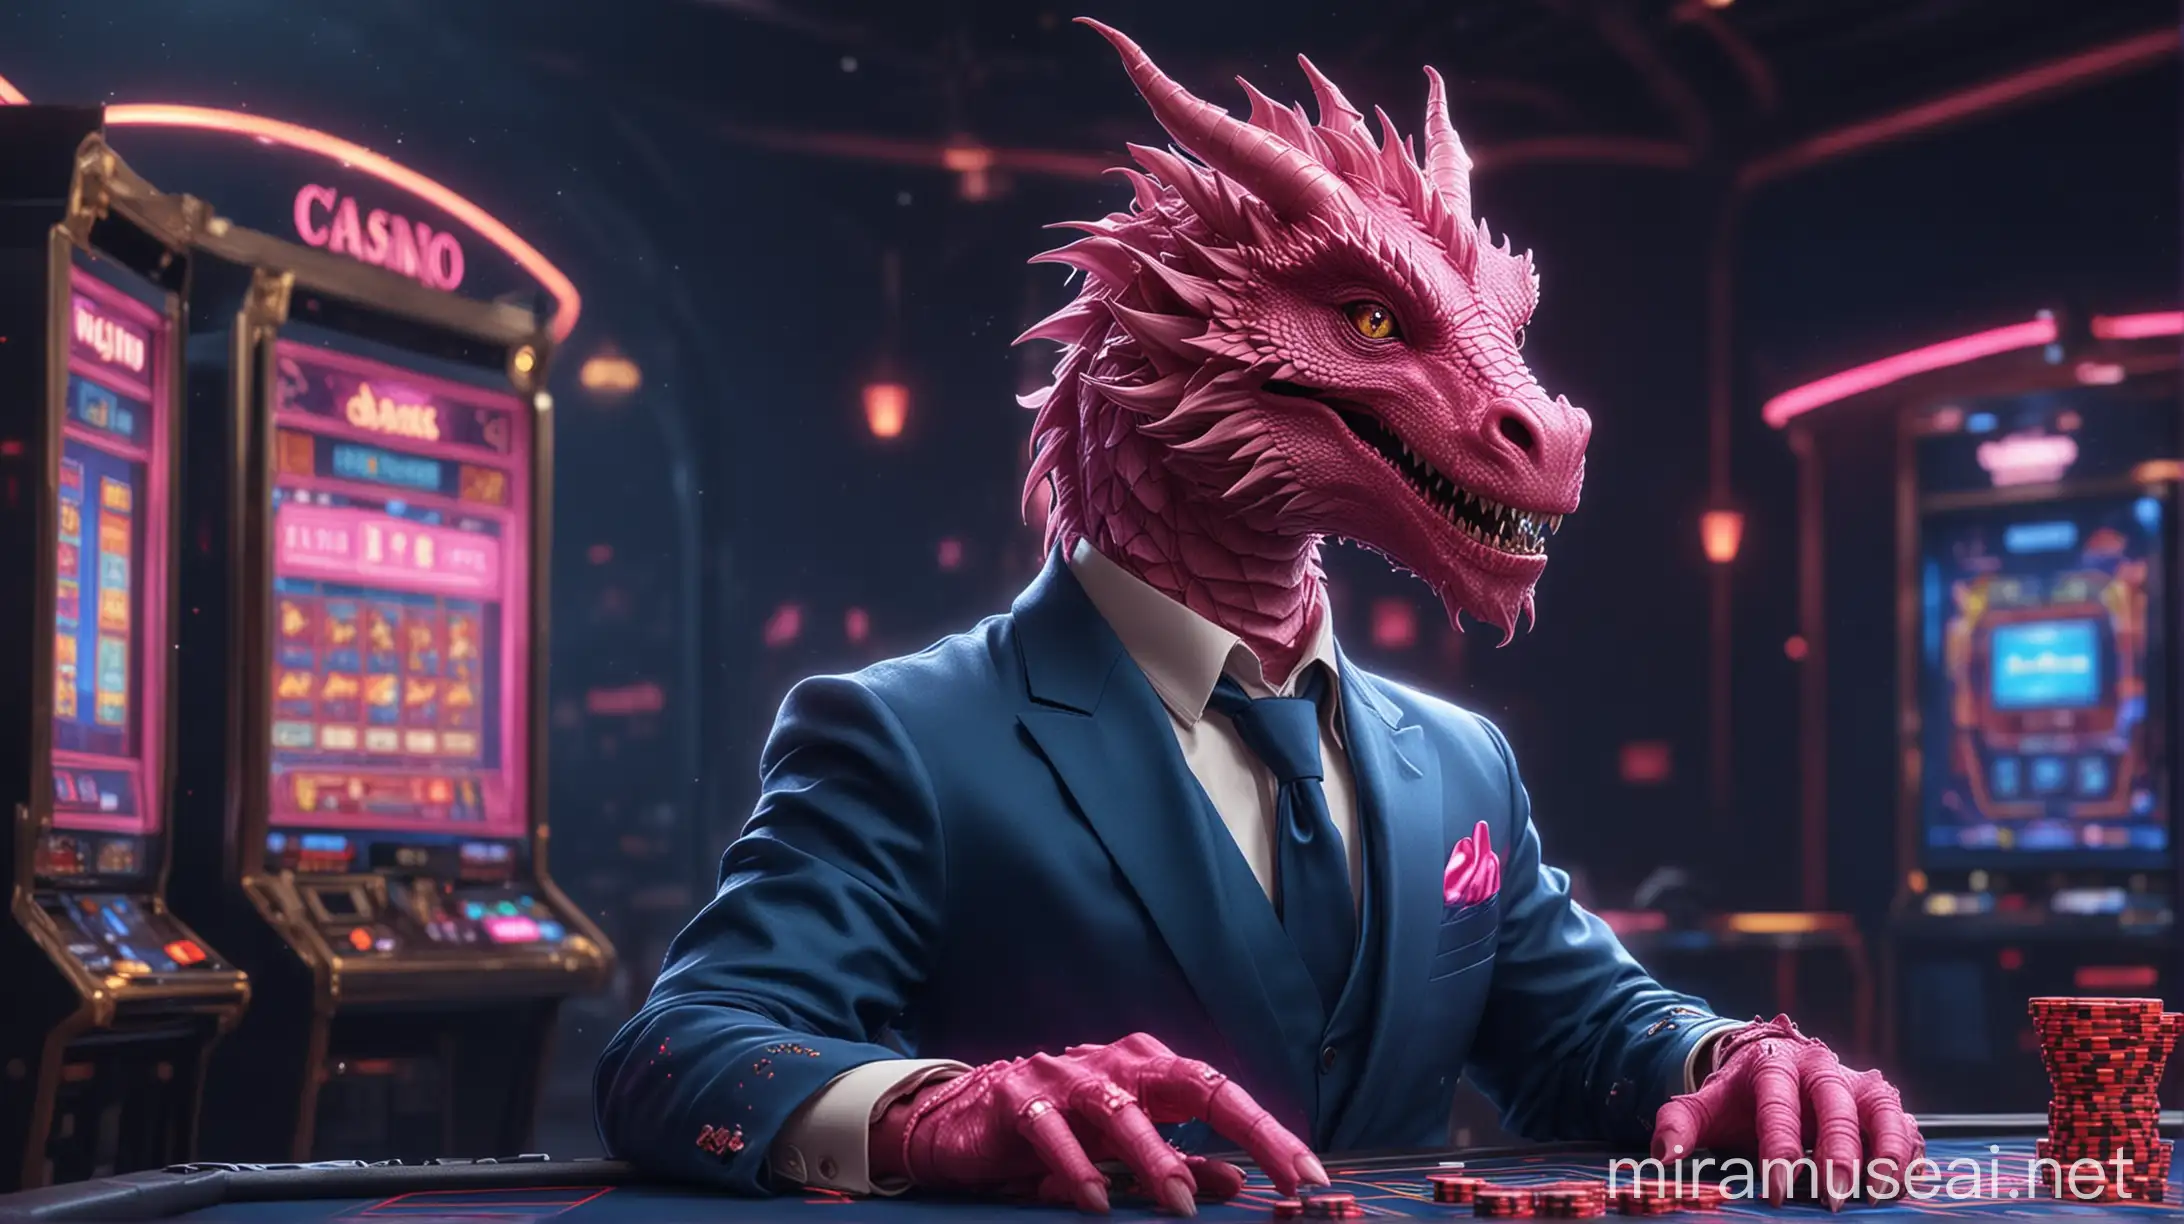 a pink aristocrat dragon in a blue business suit in from the future, plays a game in a casino and online casino gambling, playing online casino game "mines", neon cosmic style of casino in space
